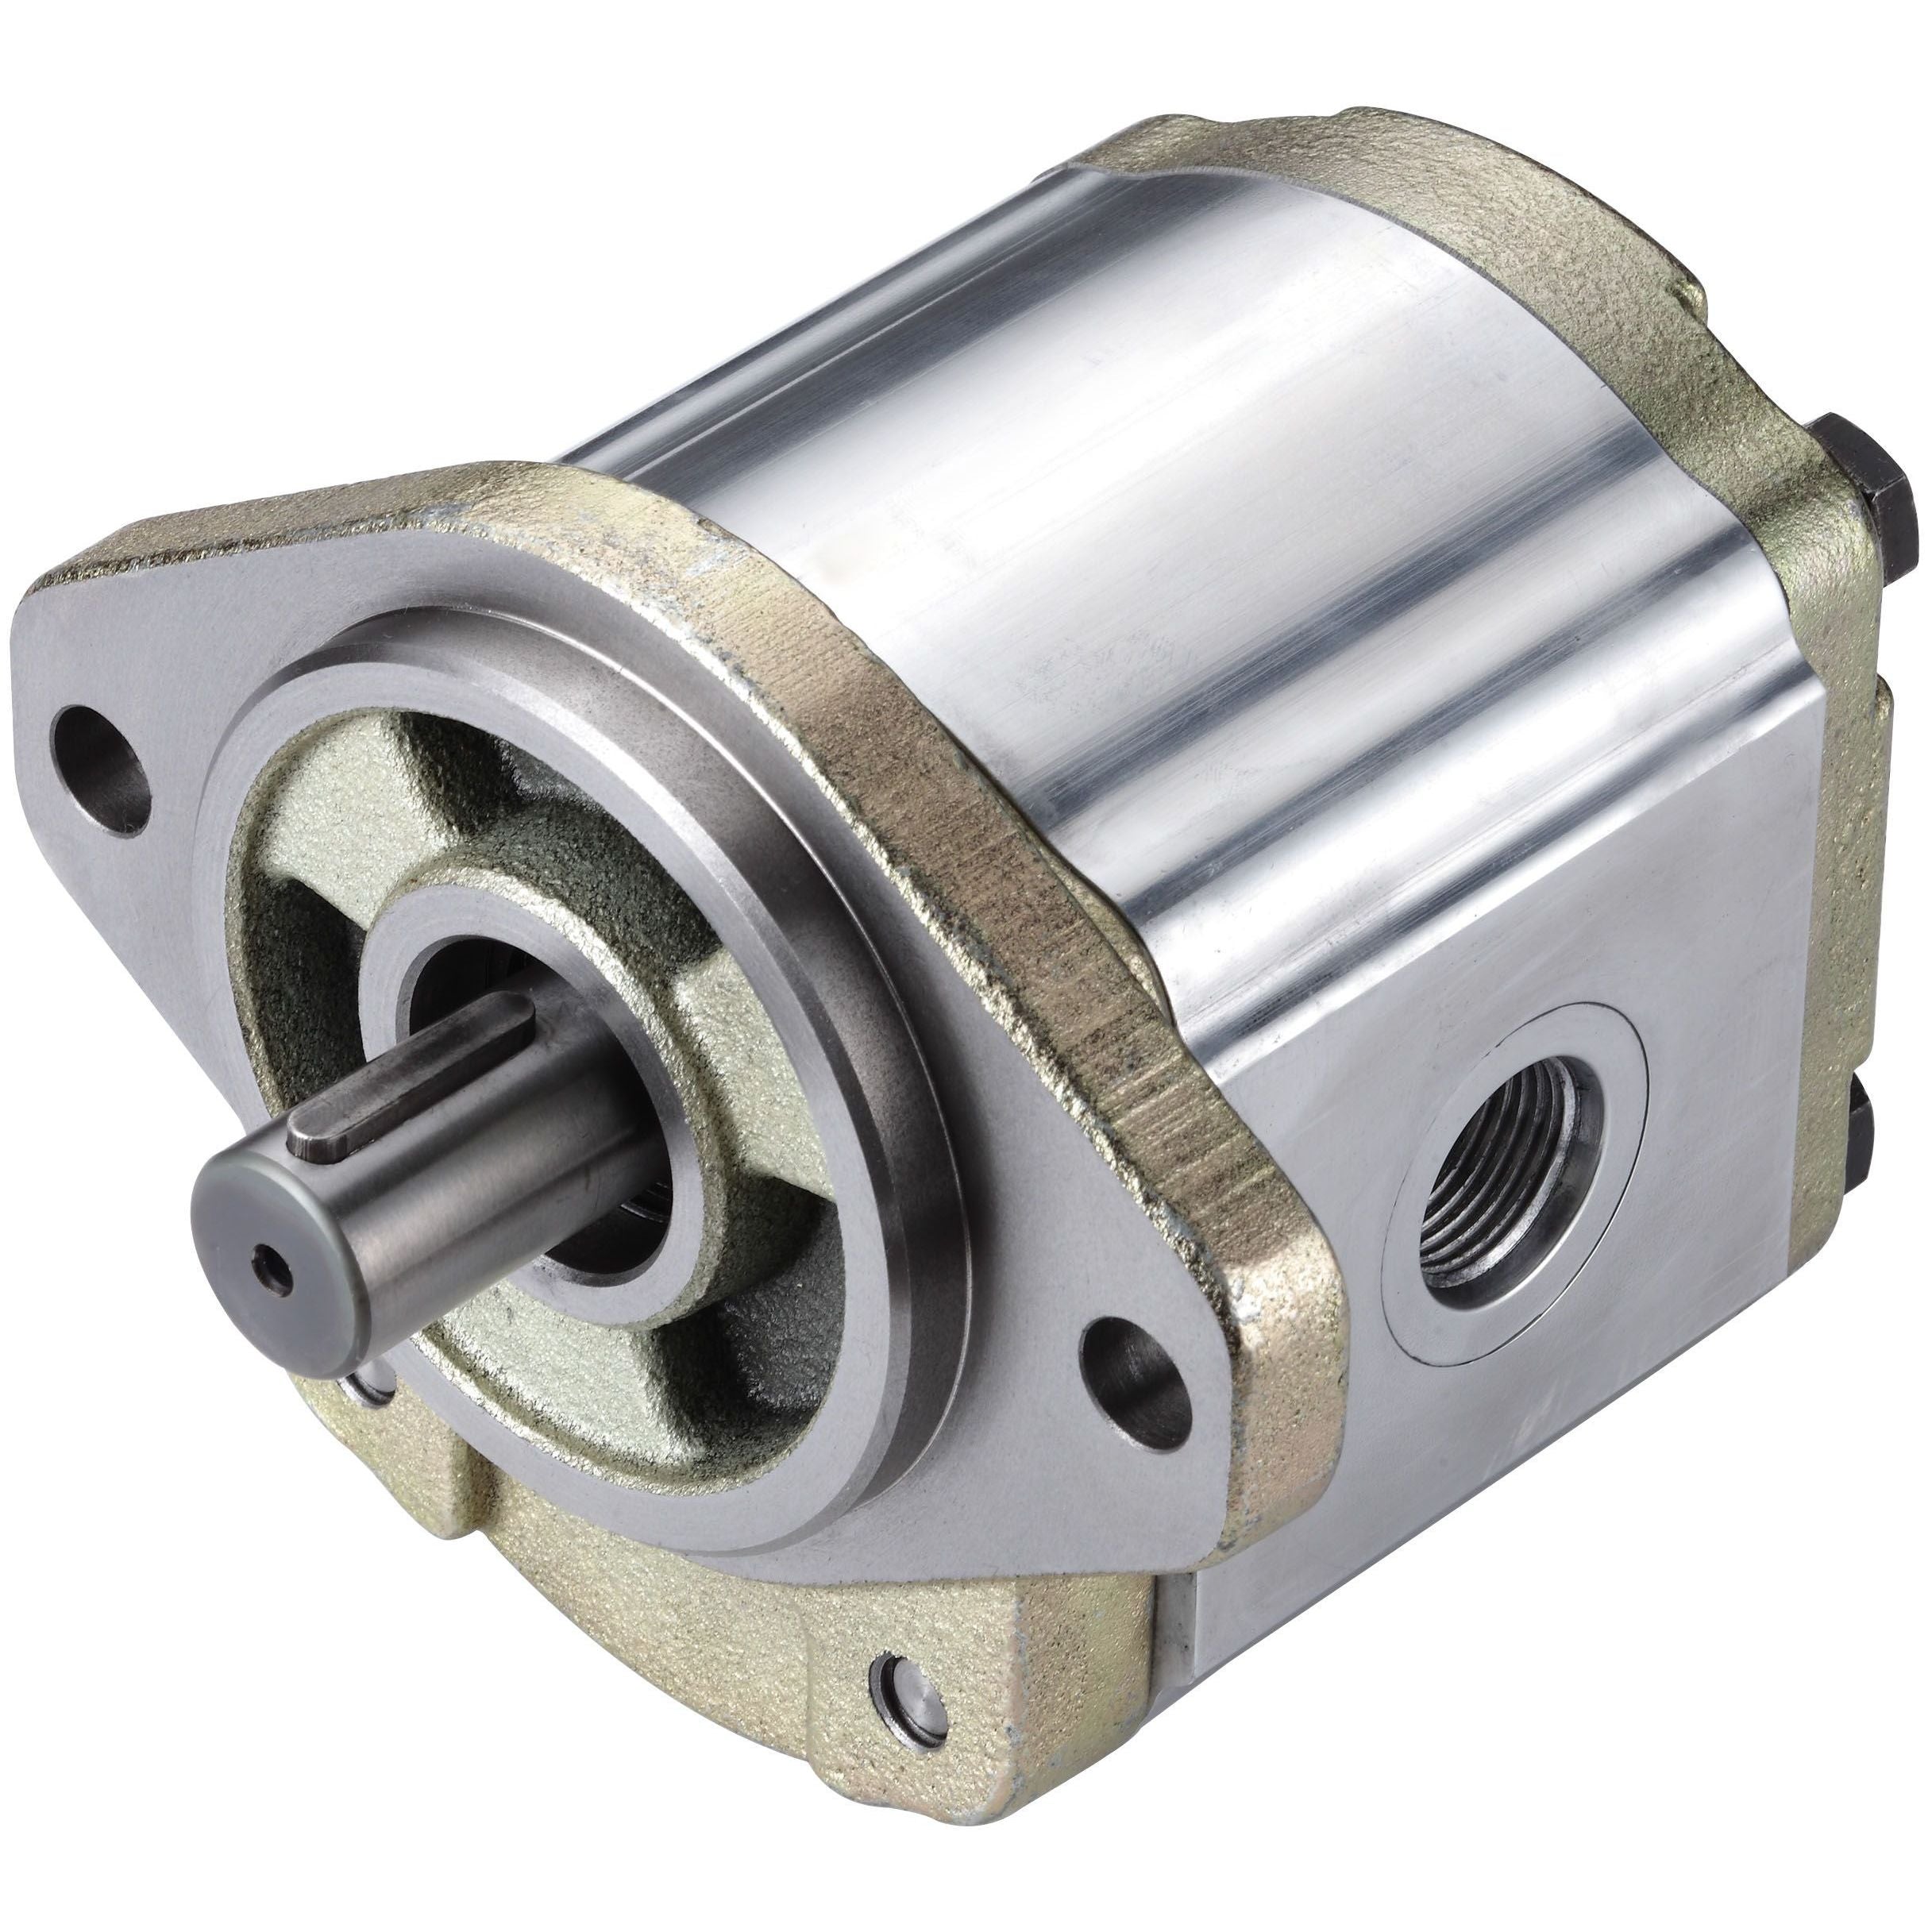 3GB8U160L : Honor Gear Pump, CCW Rotation, 60cc (3.66in3), 28.53 GPM, 2600psi, 2500 RPM, #16 SAE (1") In, #16 SAE (1") Out, Splined Shaft 13-Tooth, 16/32 Pitch, SAE B 2-Bolt Mount